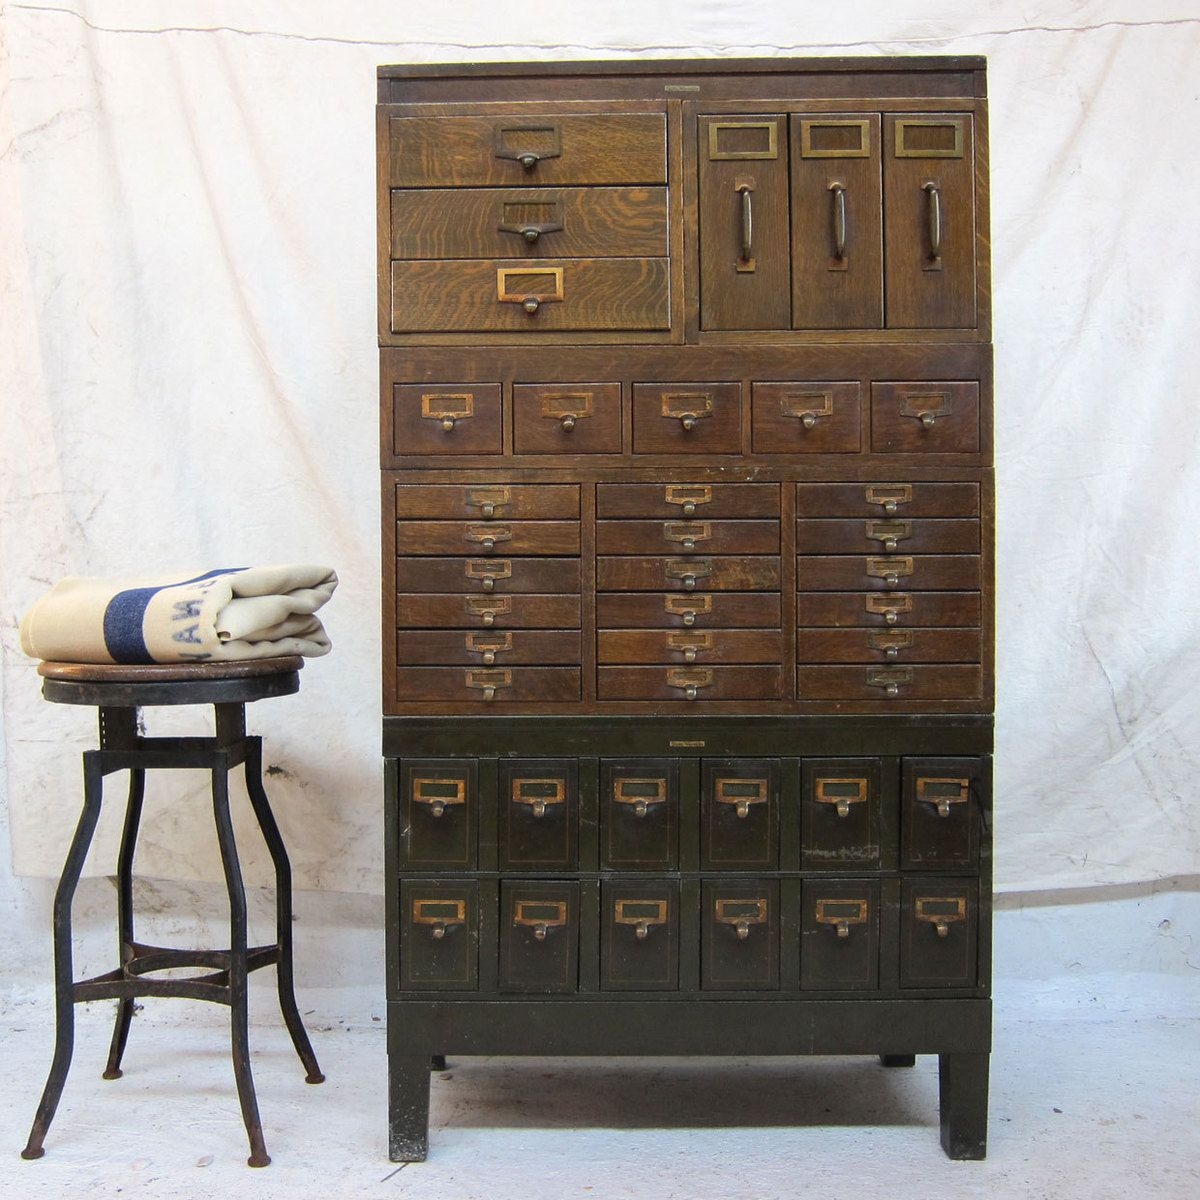 Love this early 1900s modular stacking cabinet is from manufacturer